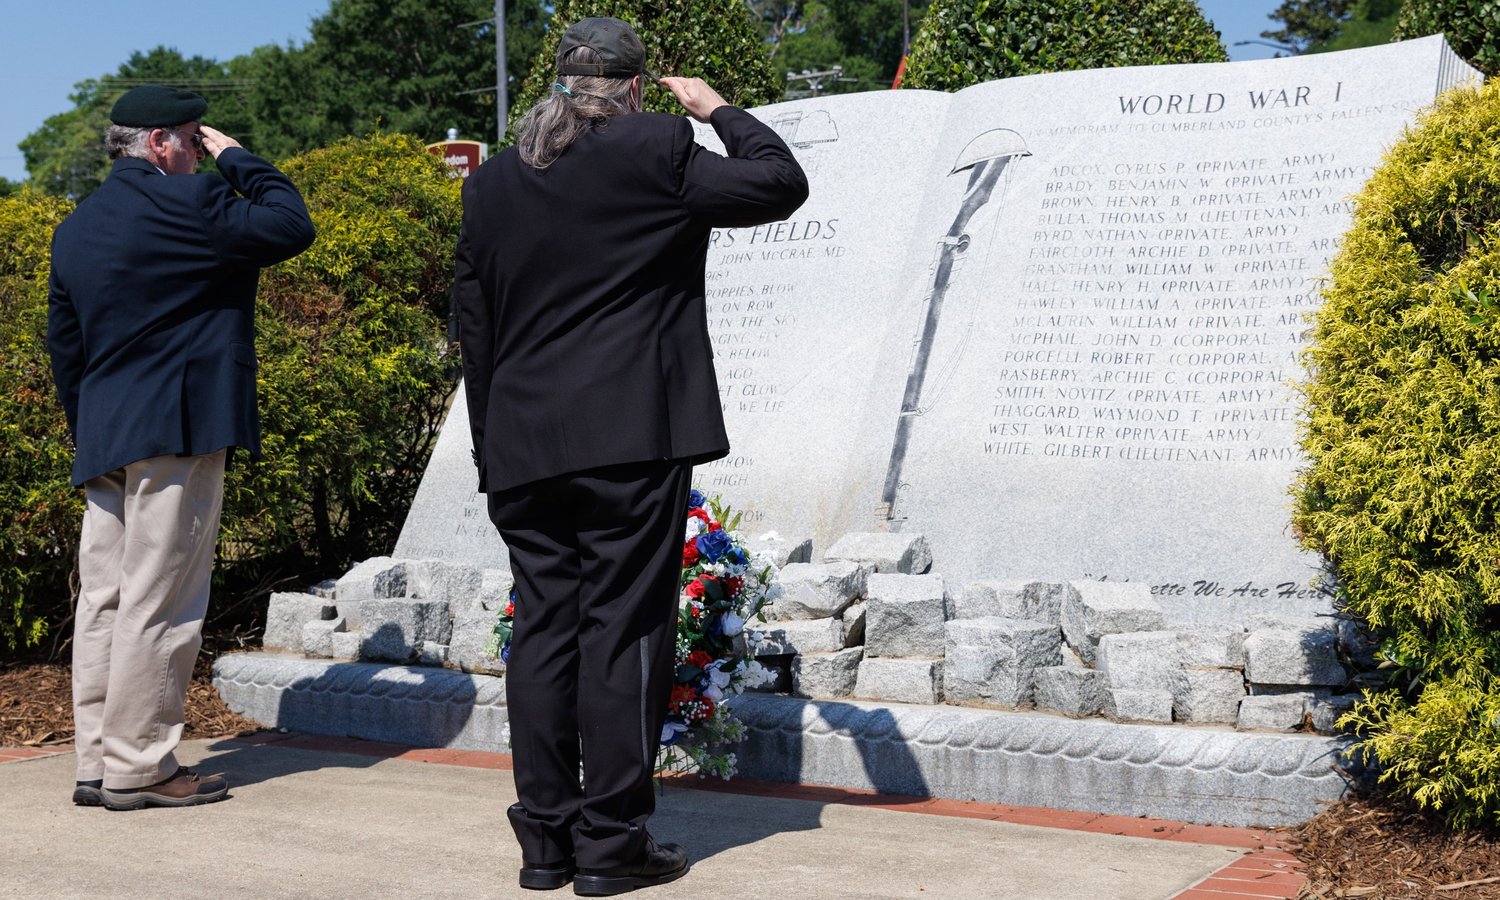 About 300 people attended a Memorial Day service on Monday at Freedom Memorial Park in downtown Fayetteville.